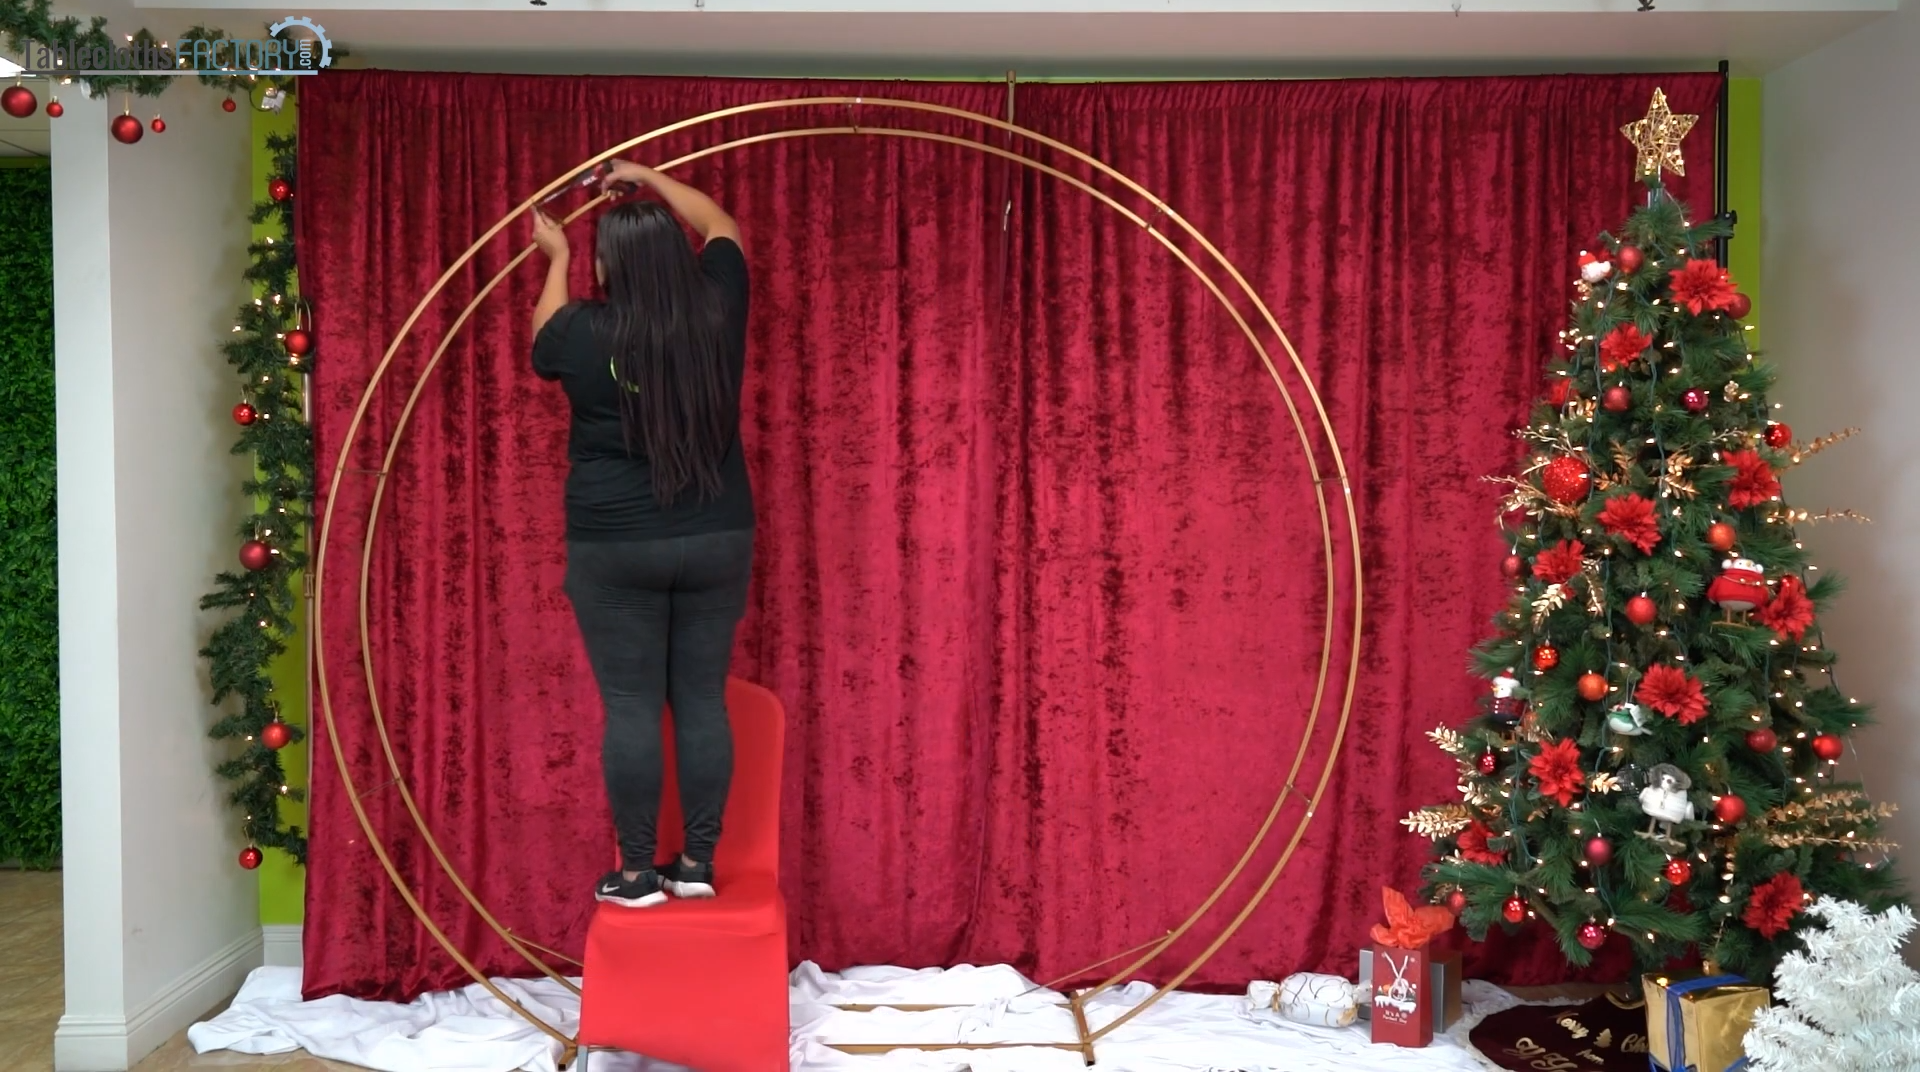 Assembling the double hoop backdrop stand